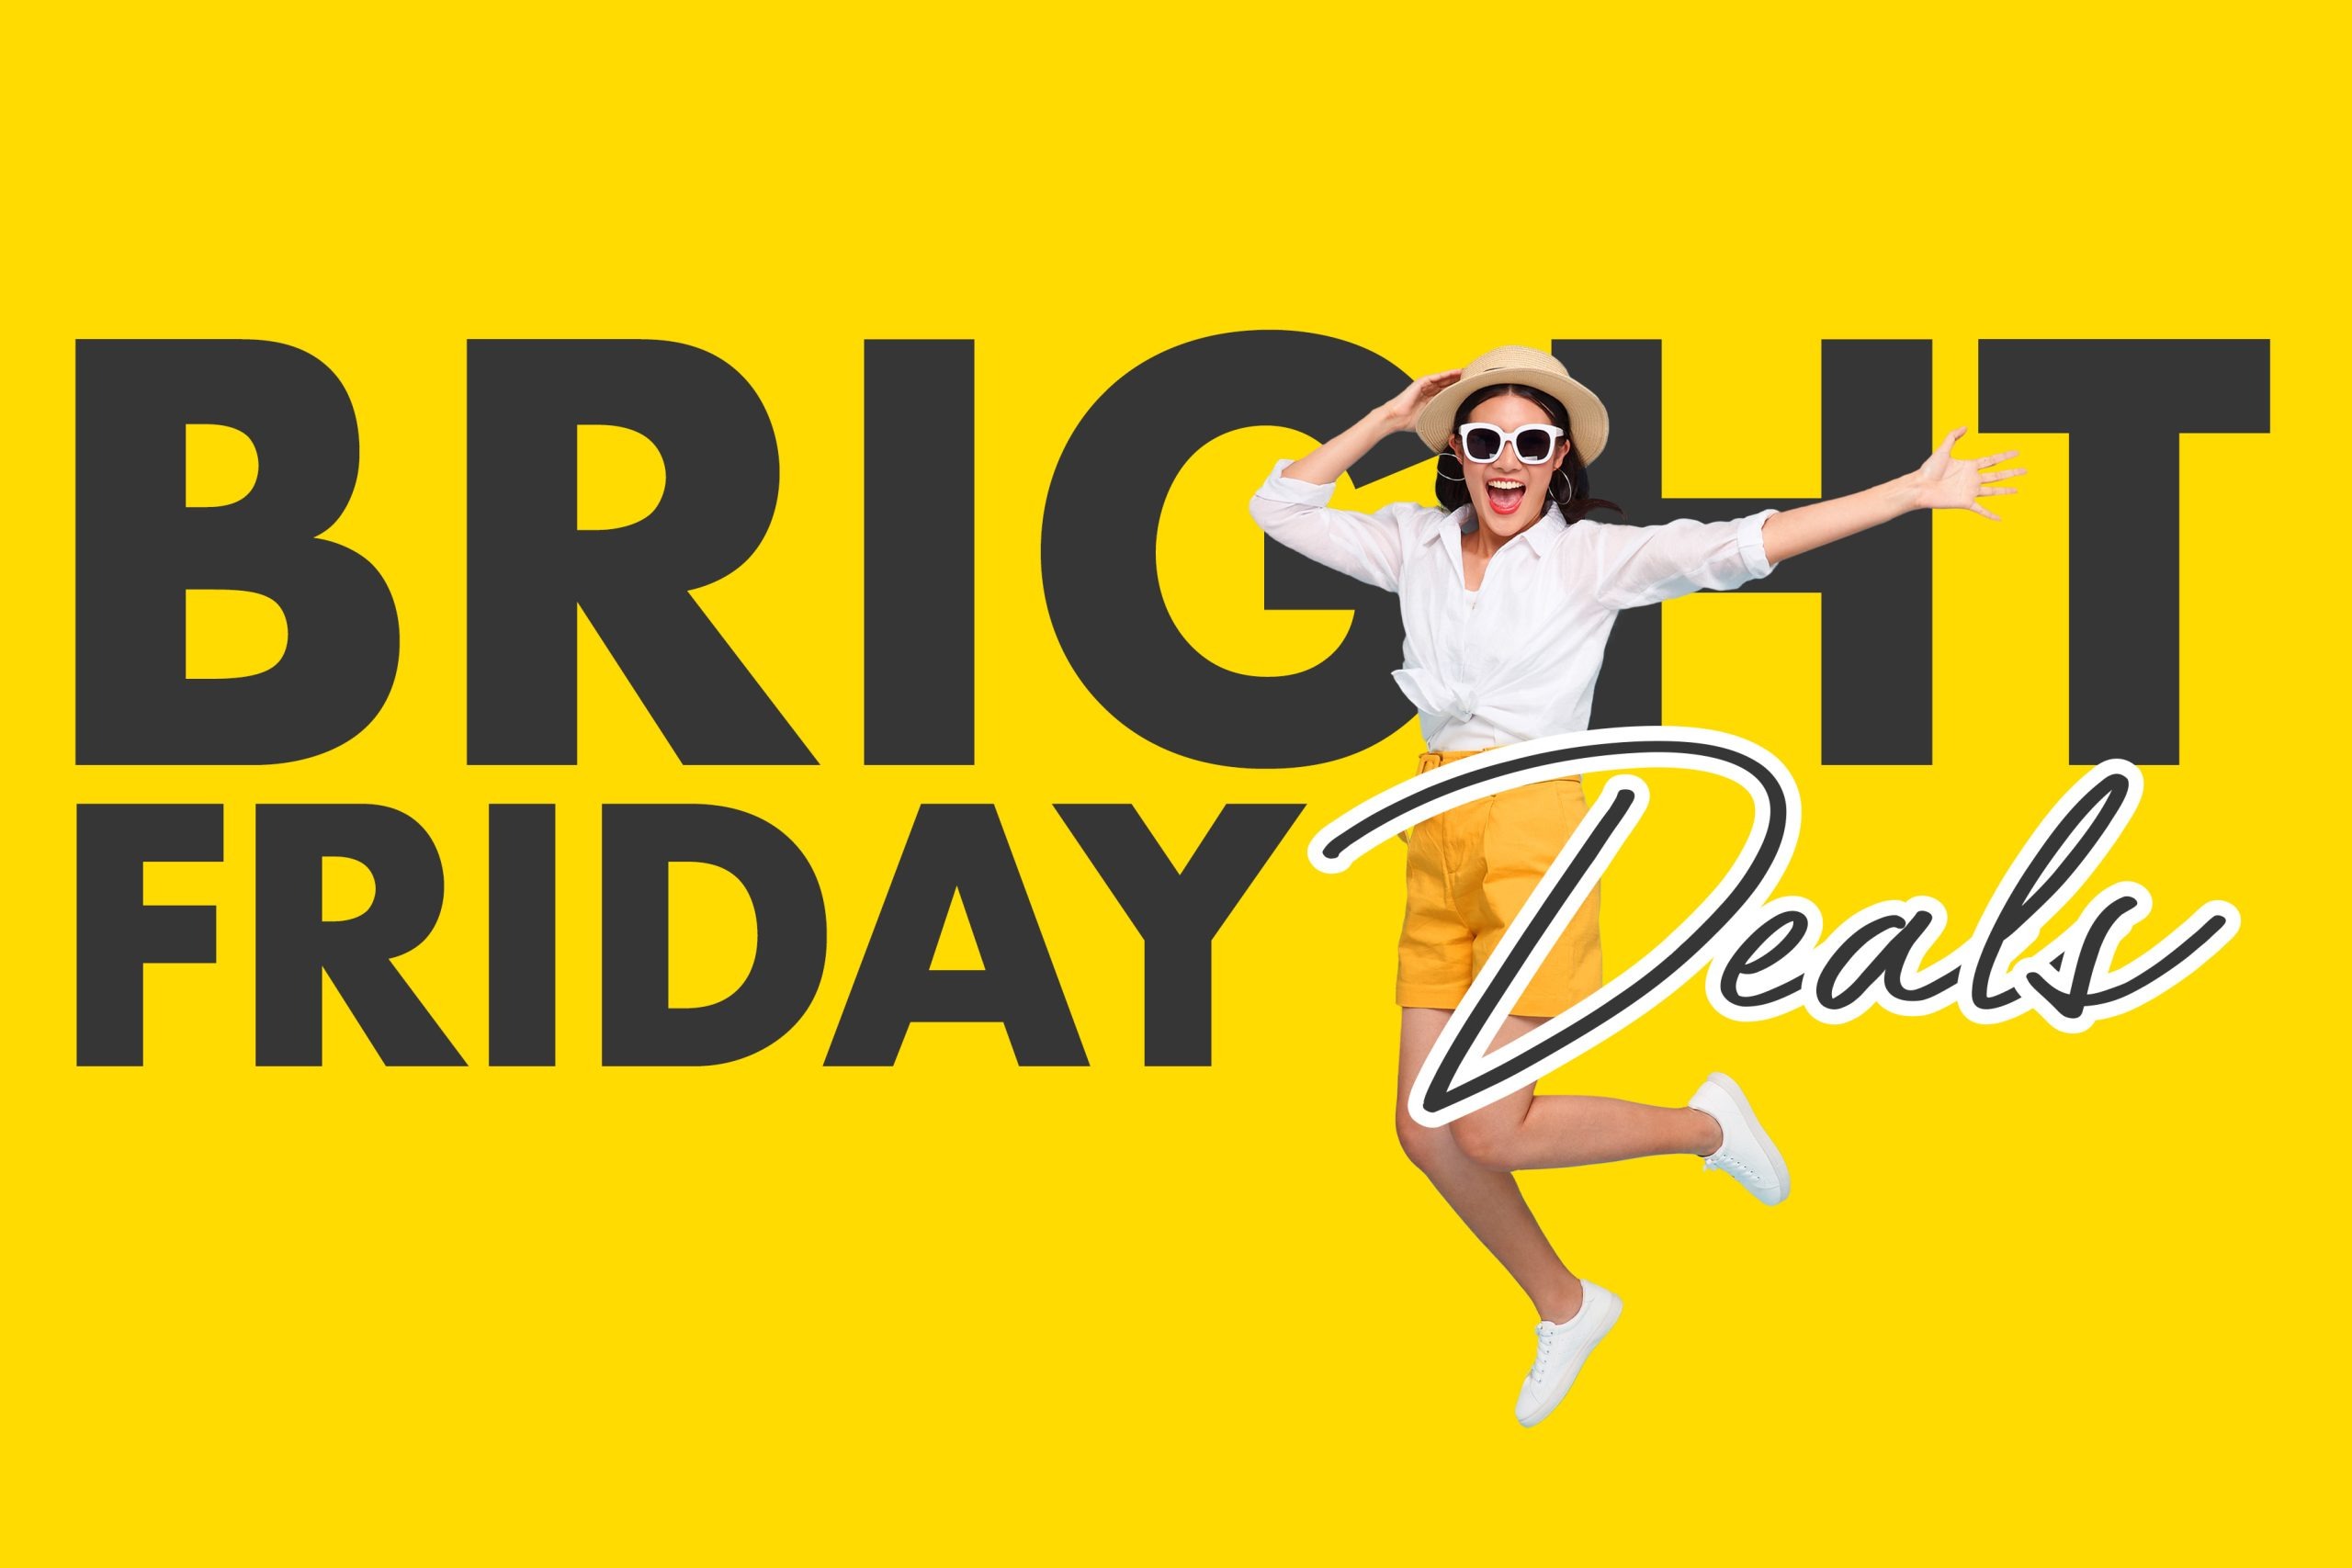 Brightline Shares Early Black Friday Deals